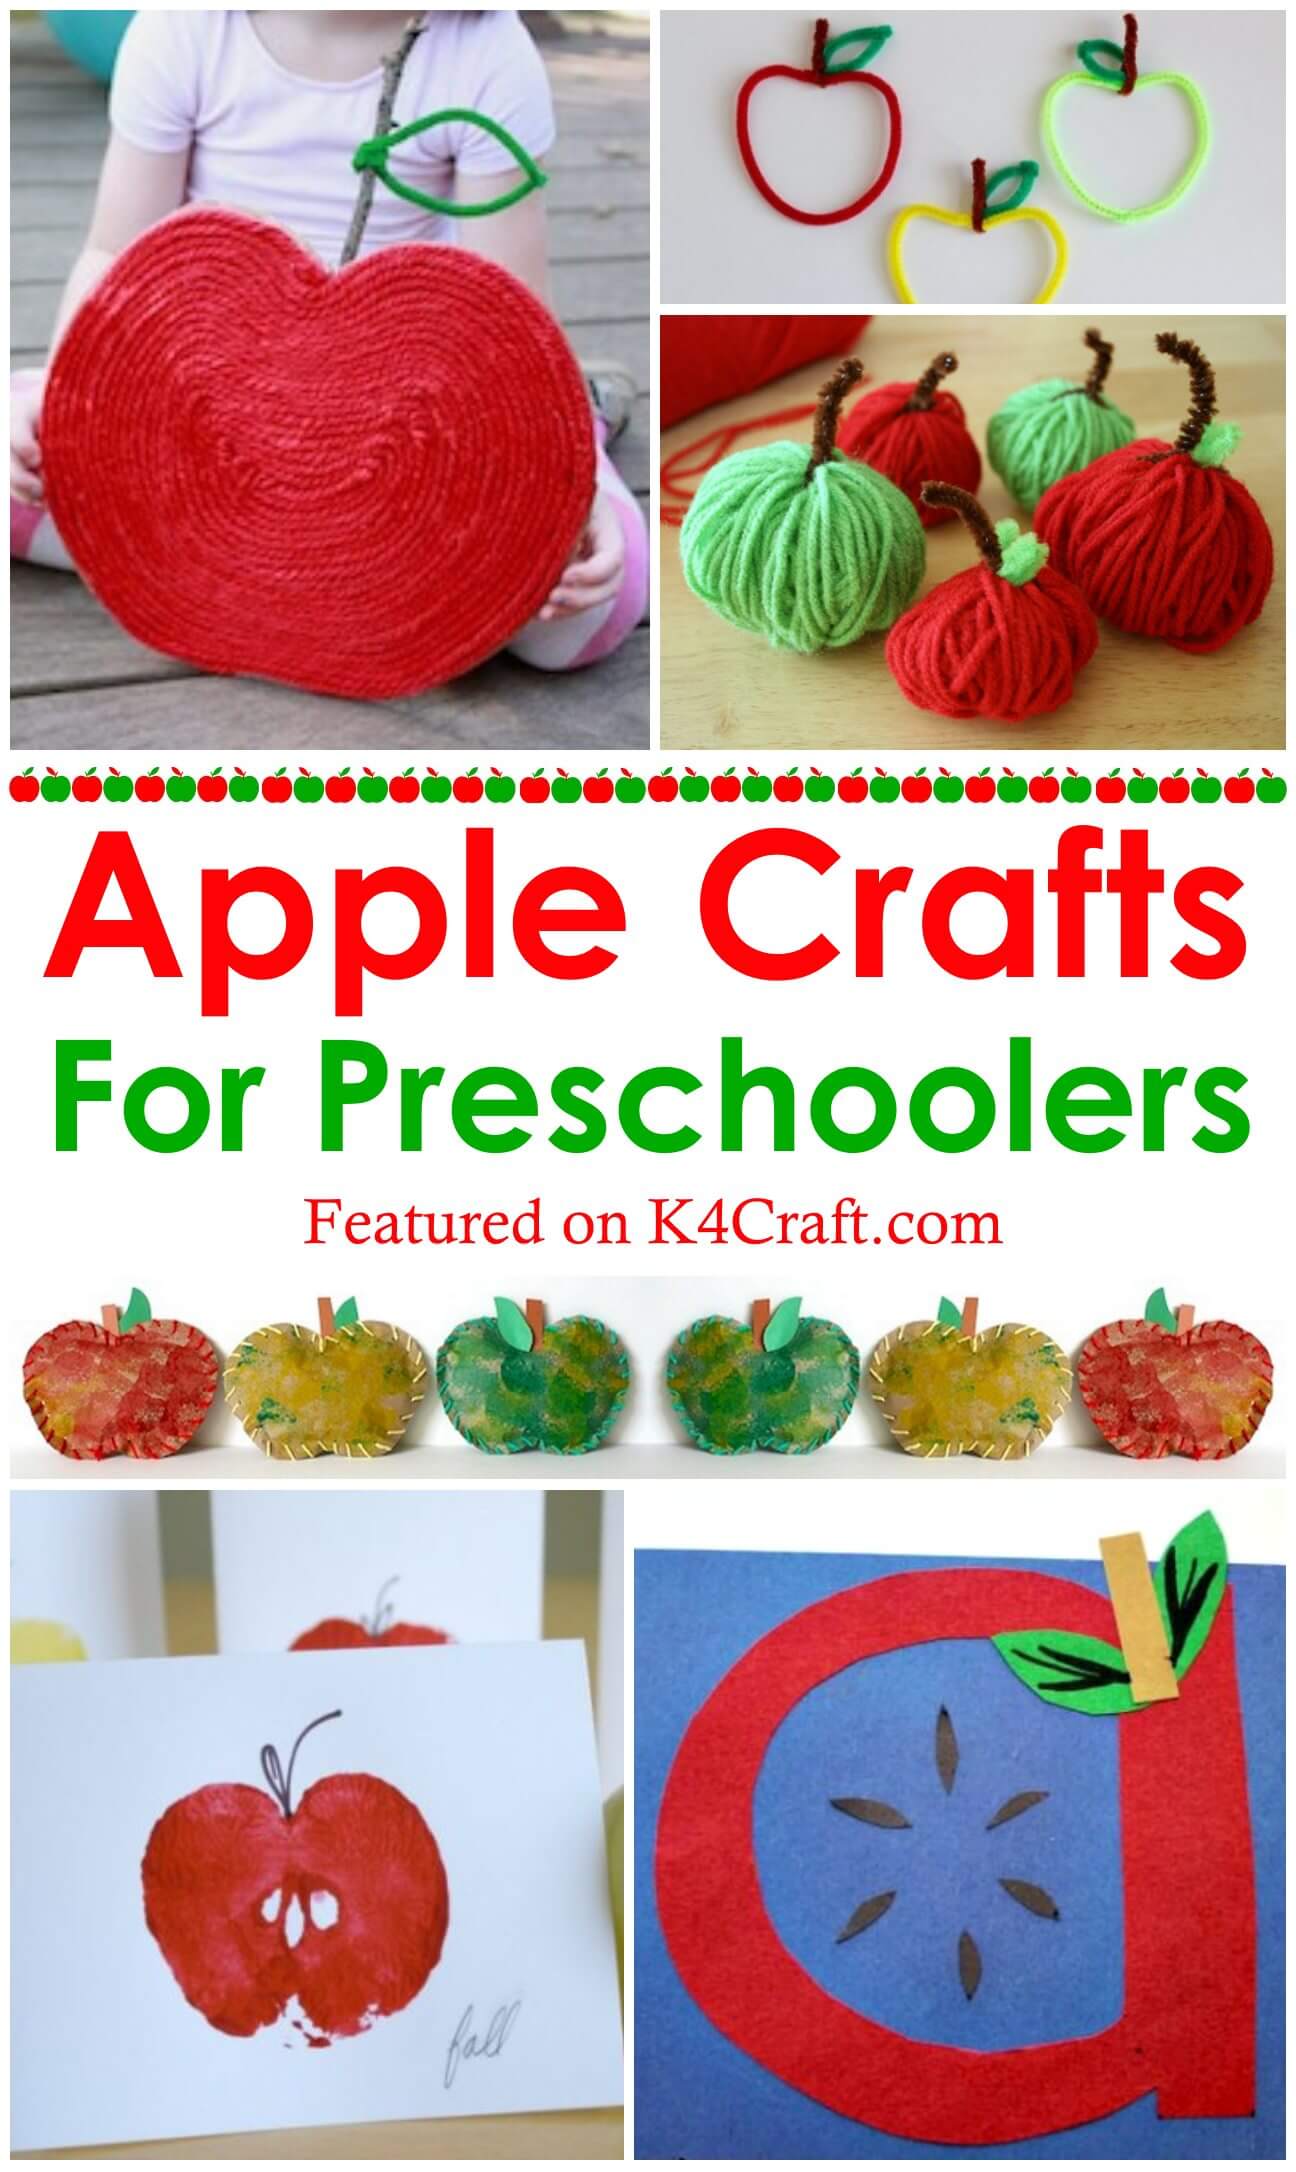 easy-apple-crafts-for-preschoolers-using-recycled-material-k4-craft